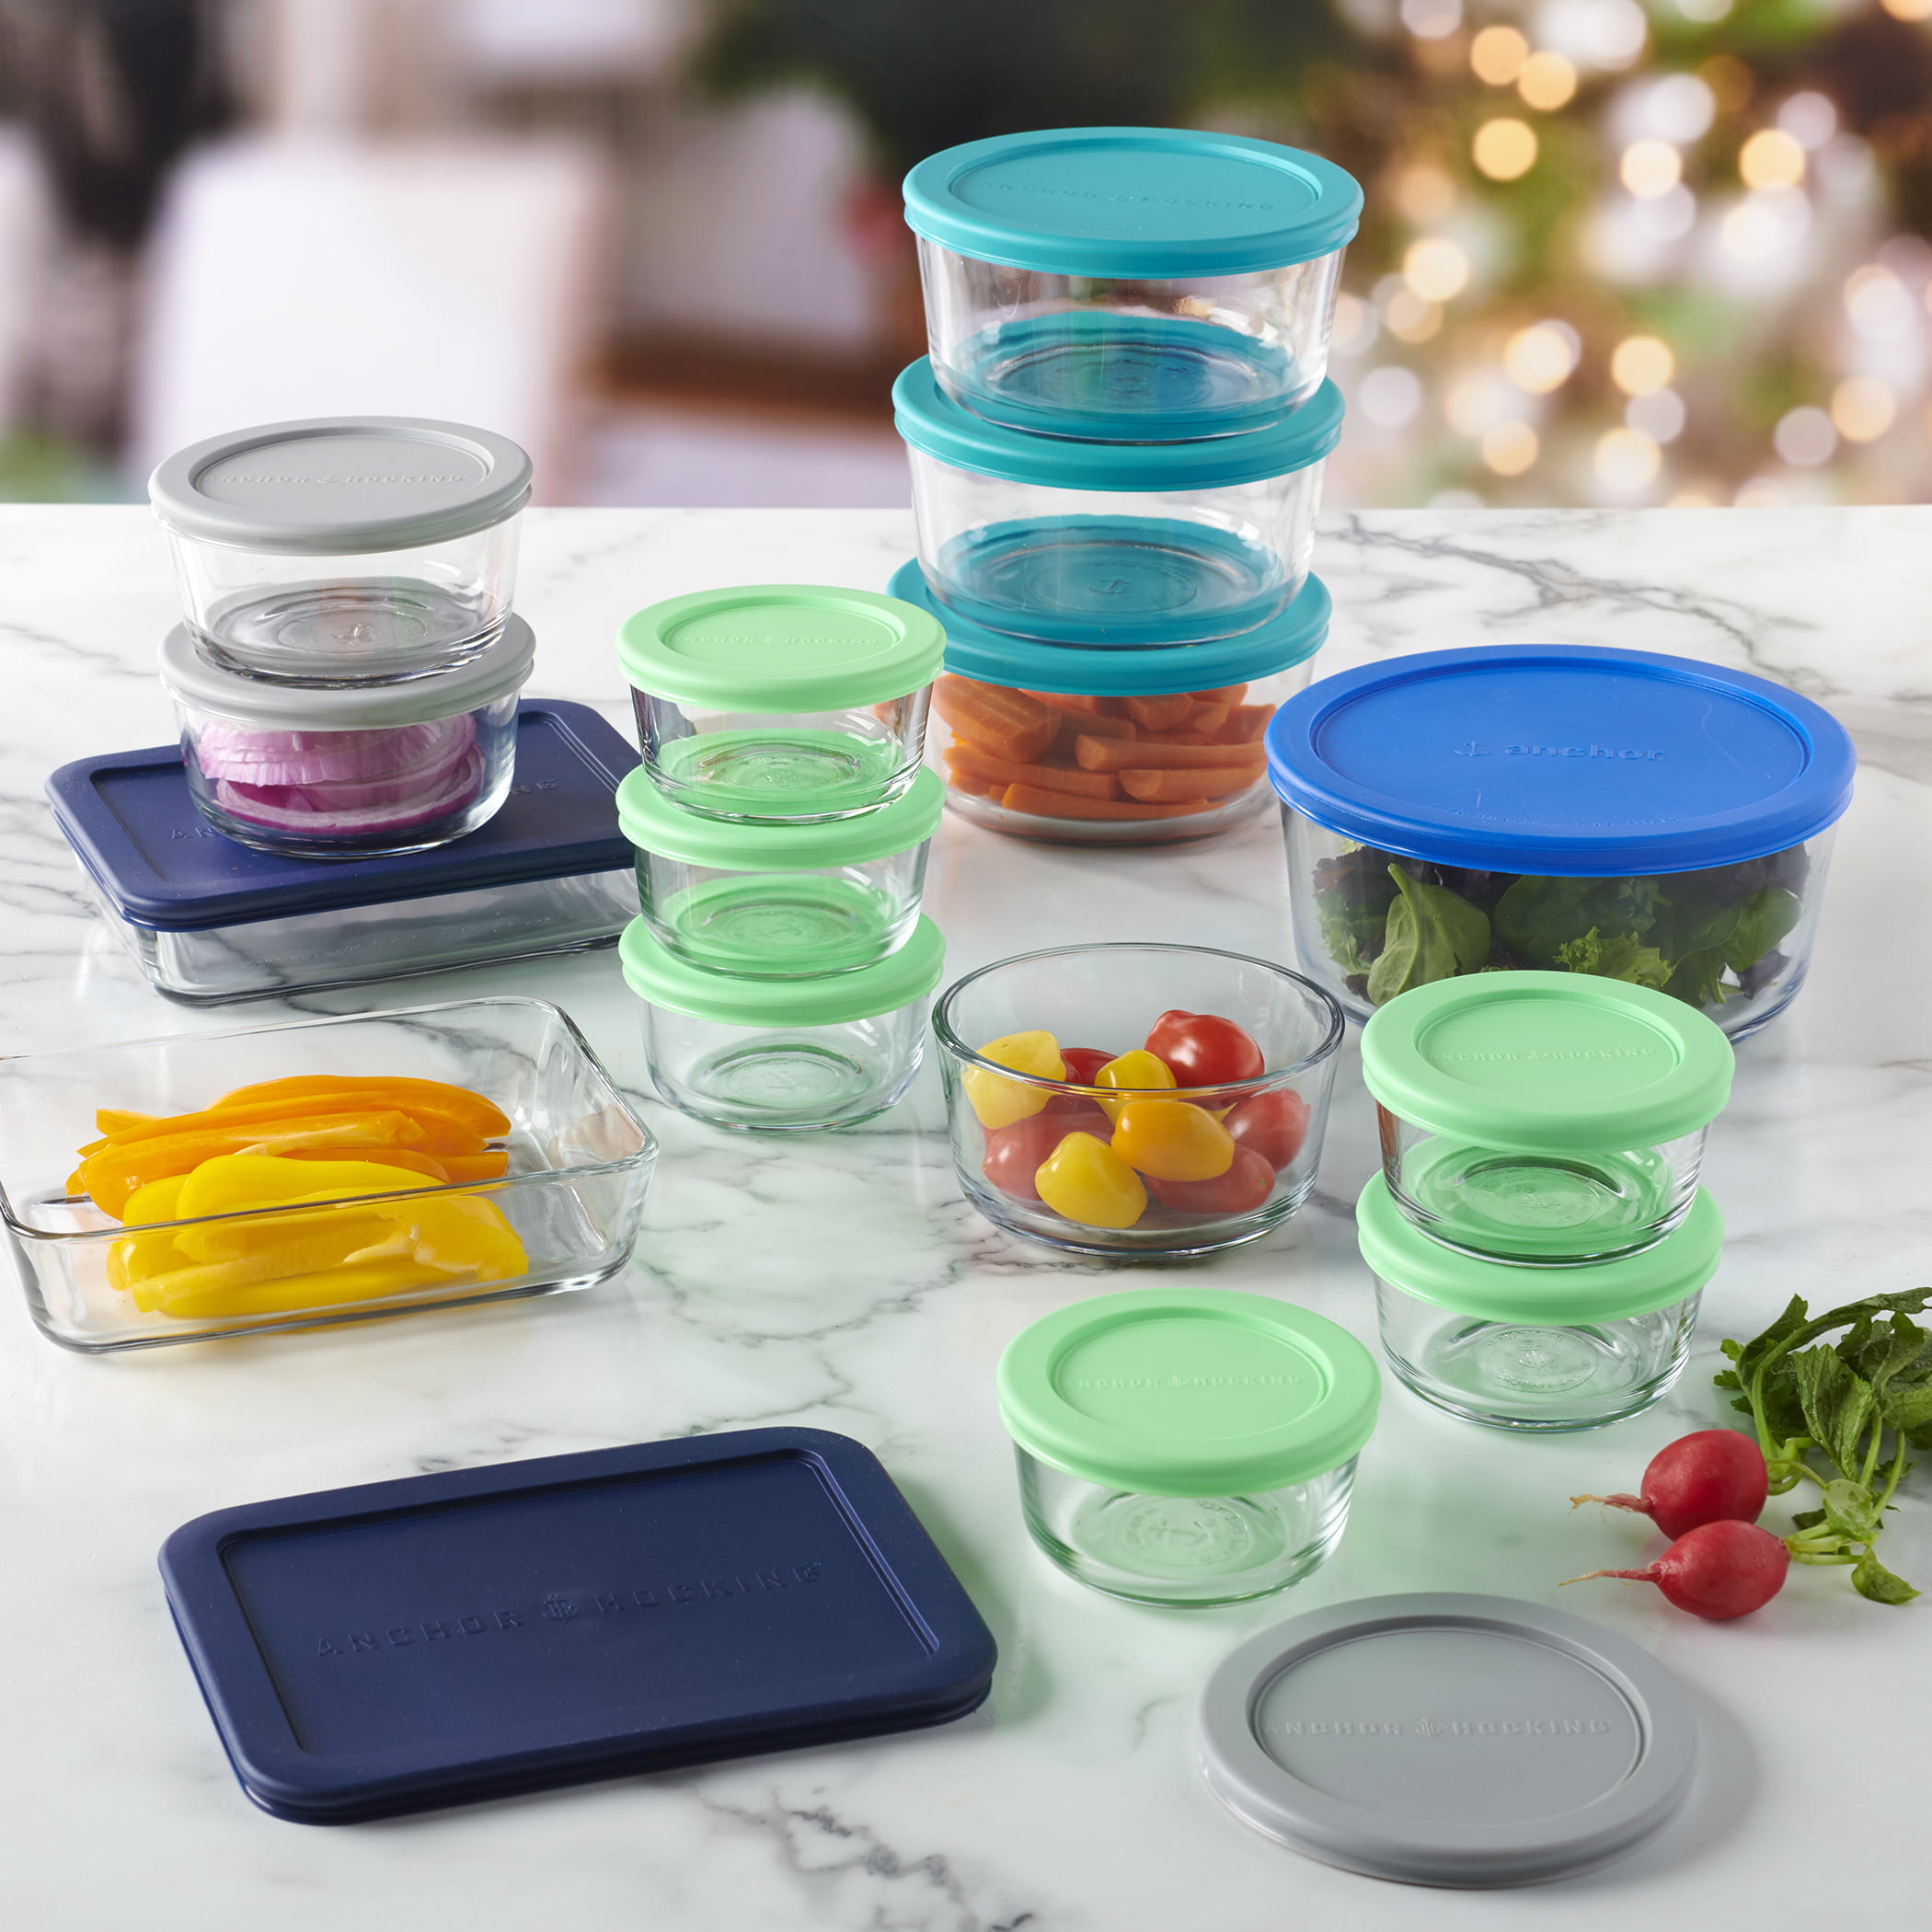 30-Piece Anchor Hocking Glass Food Storage/Bake Container Sets w/ Lids